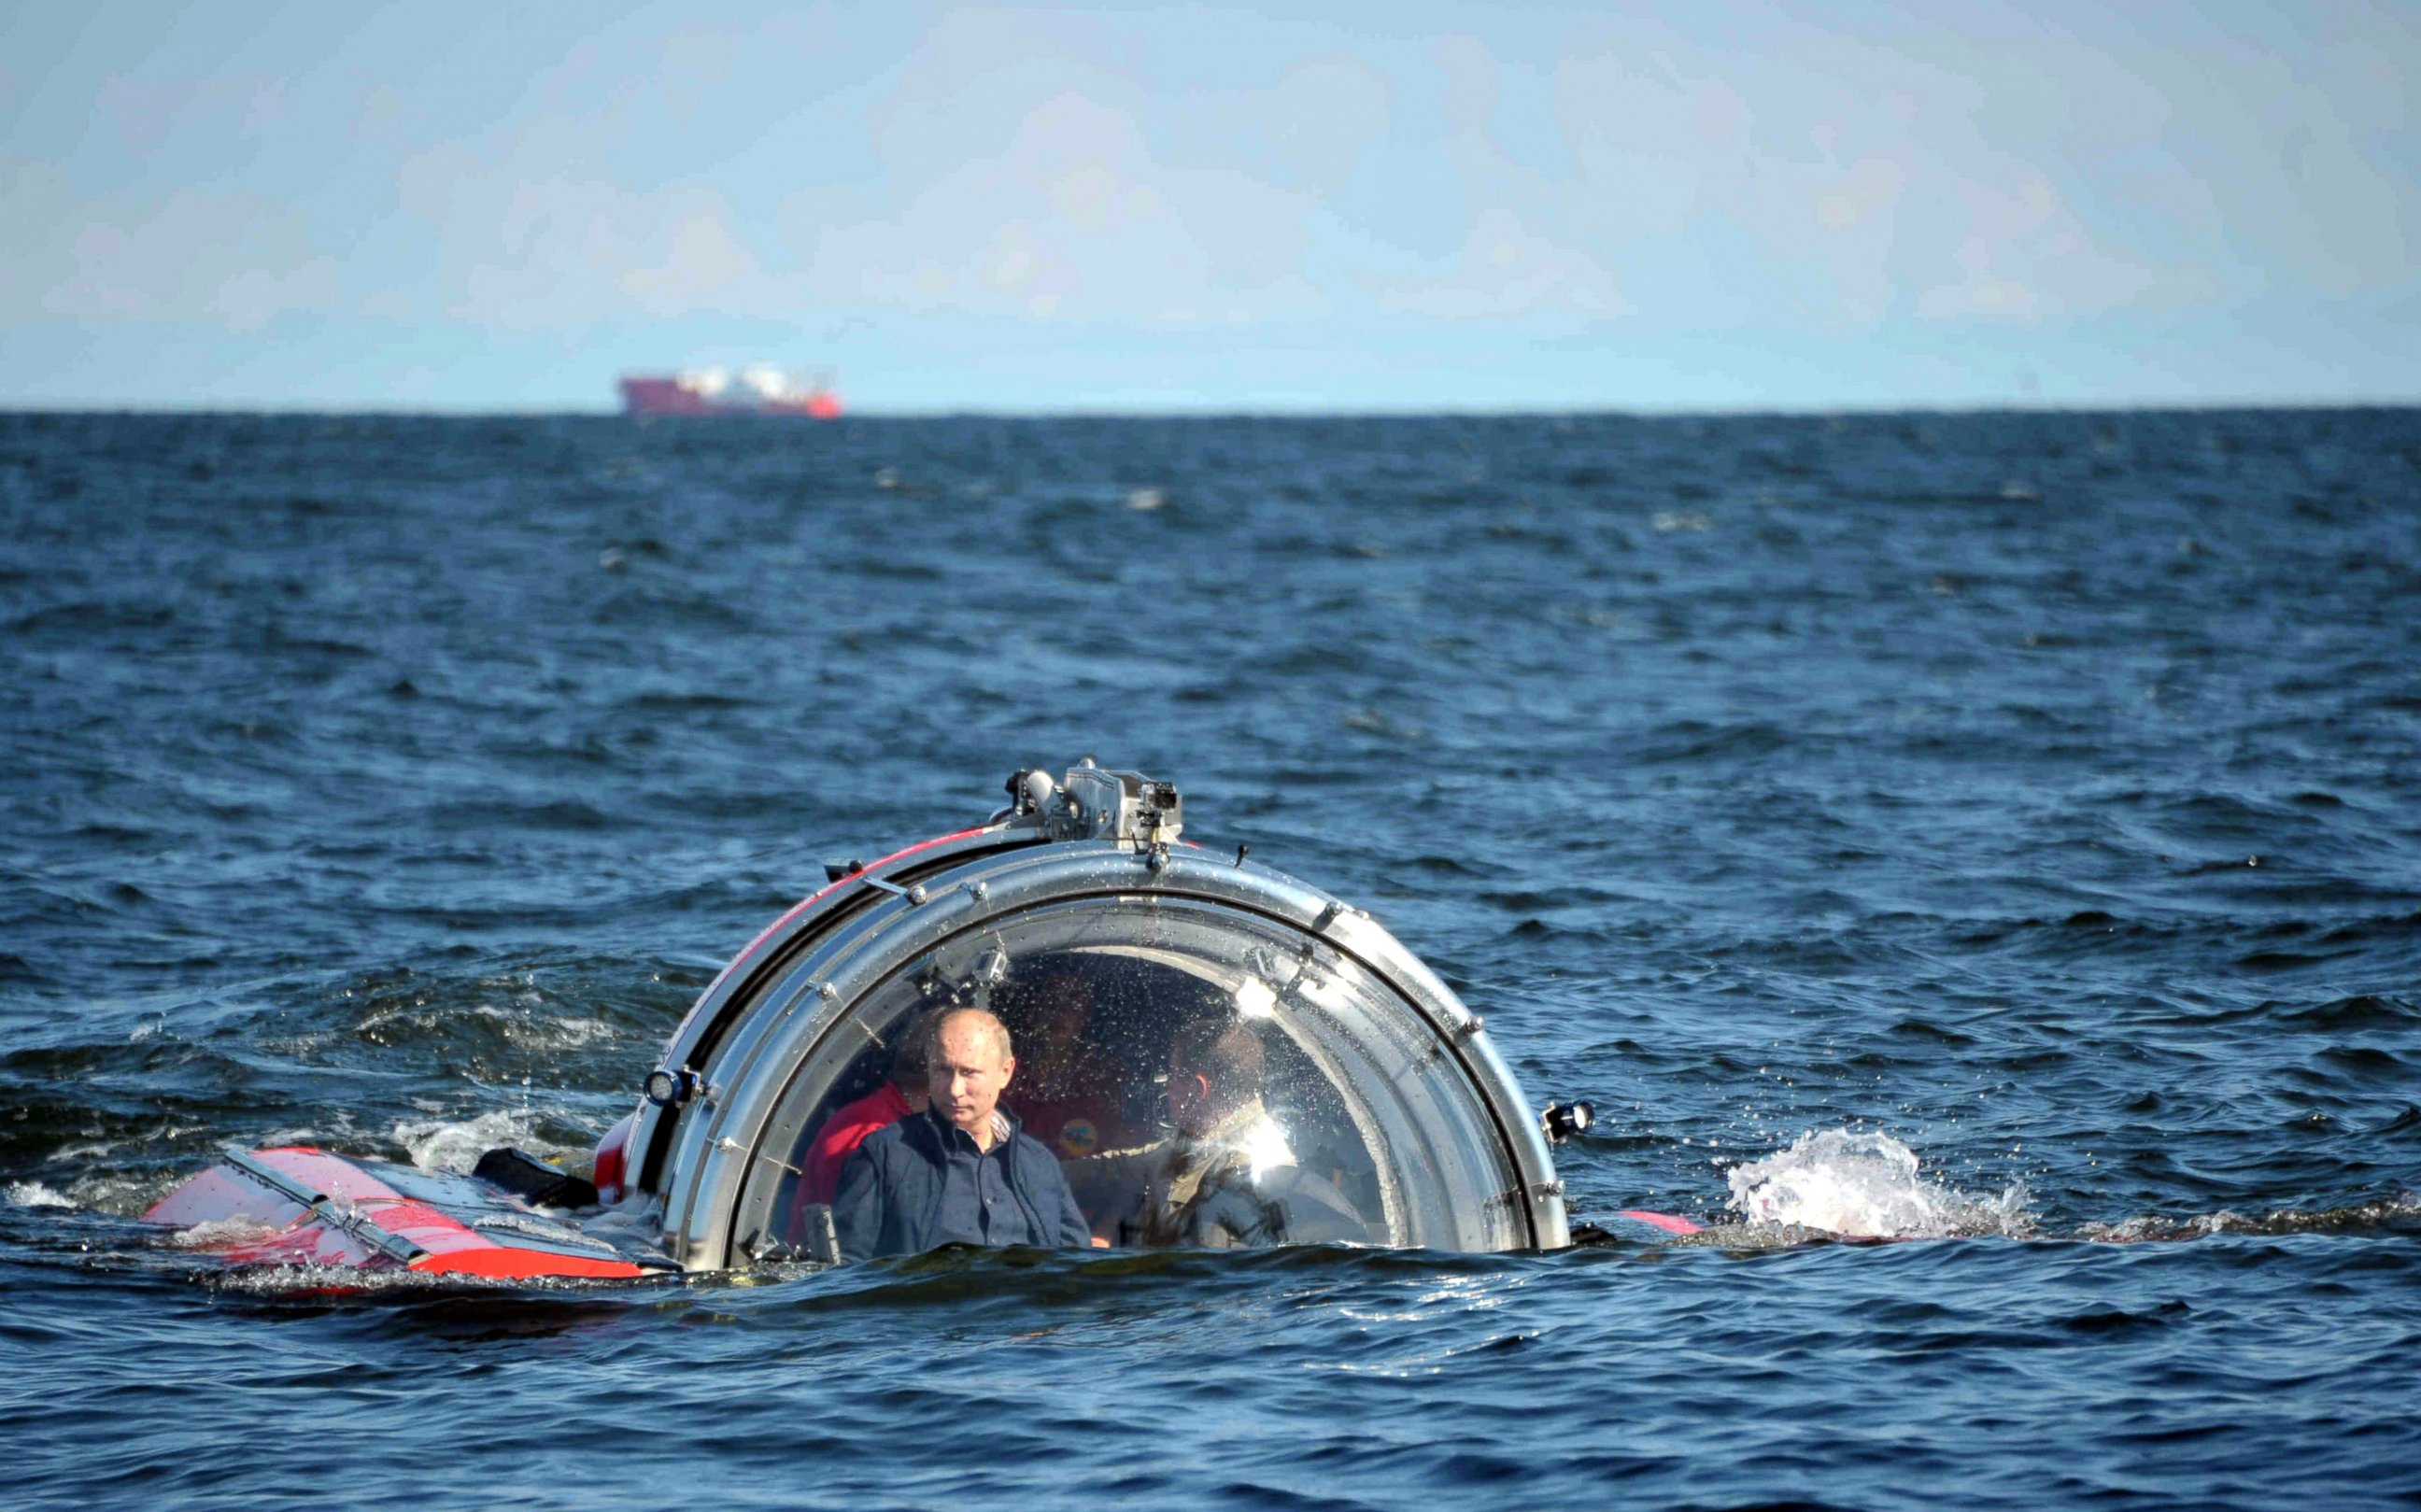 PHOTO: Russian President Vladimir Putin submerges on board Sea Explorer 5 bathyscaphe near the isle of Gogland in the Gulf of Finland, July 15, 2013, visiting Oleg frigate which sink in 1869.